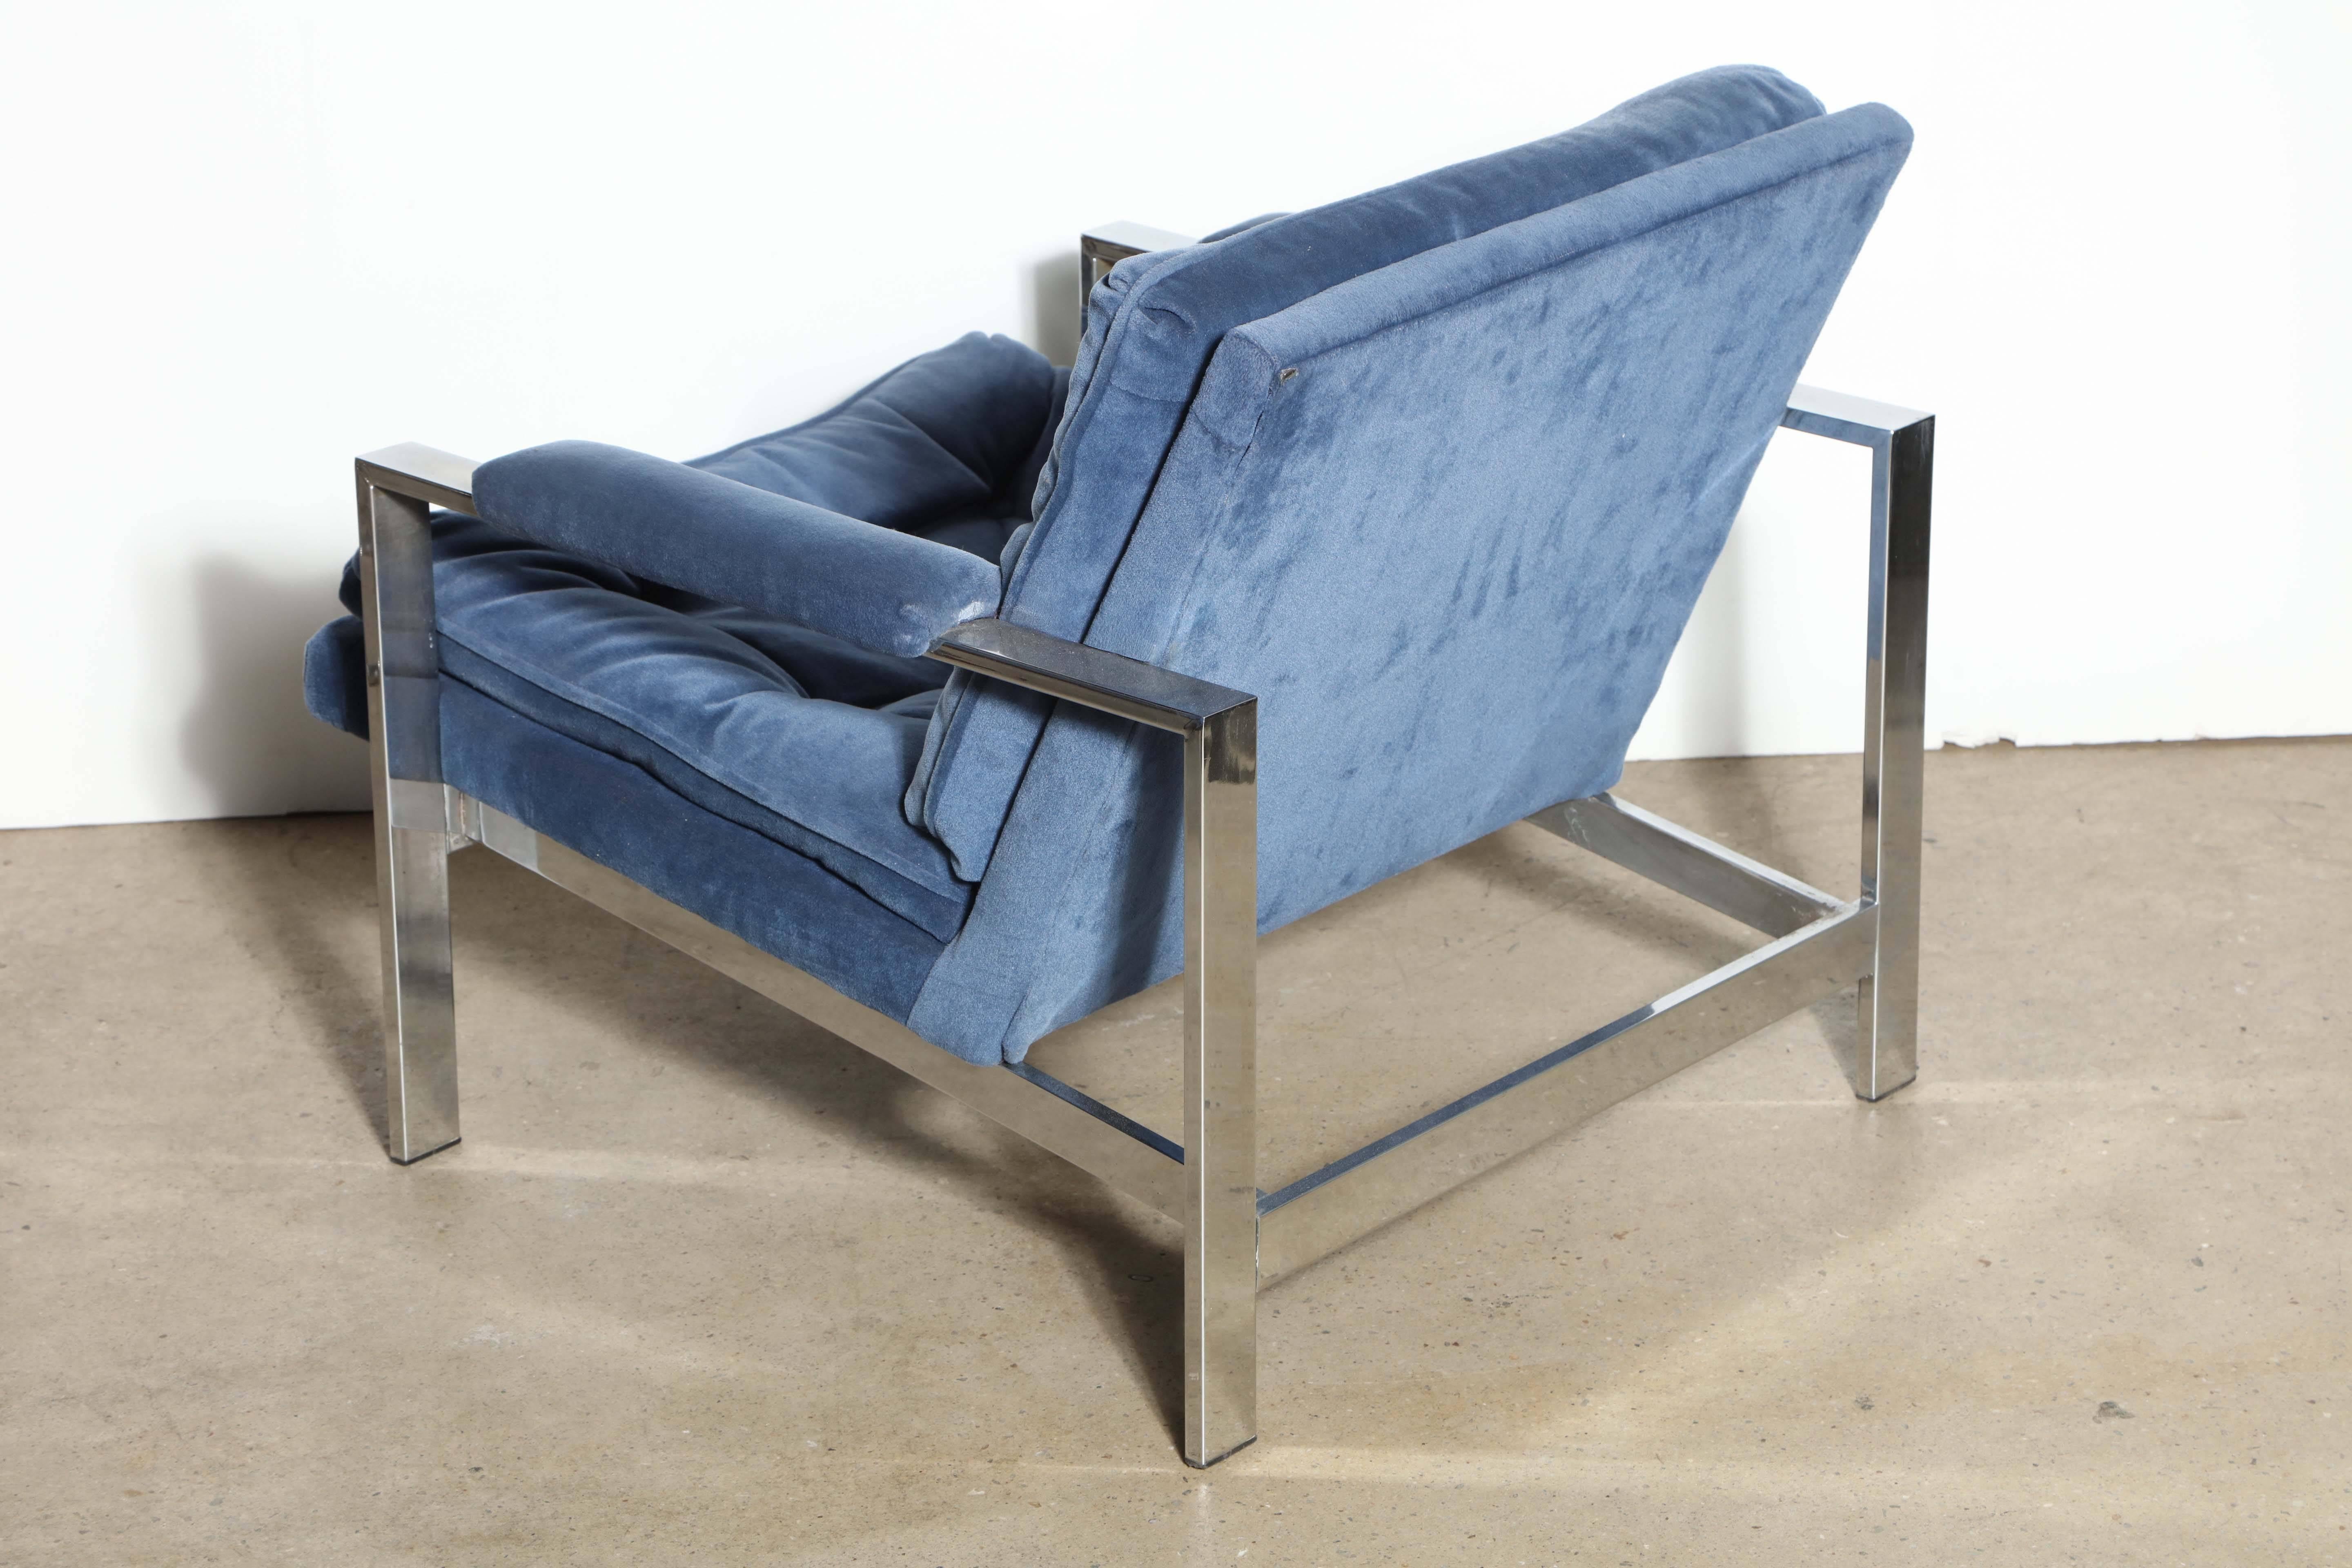 Late 20th Century Pair of 1970's Cy Mann Solid Chrome Lounge Chairs in French Blue   